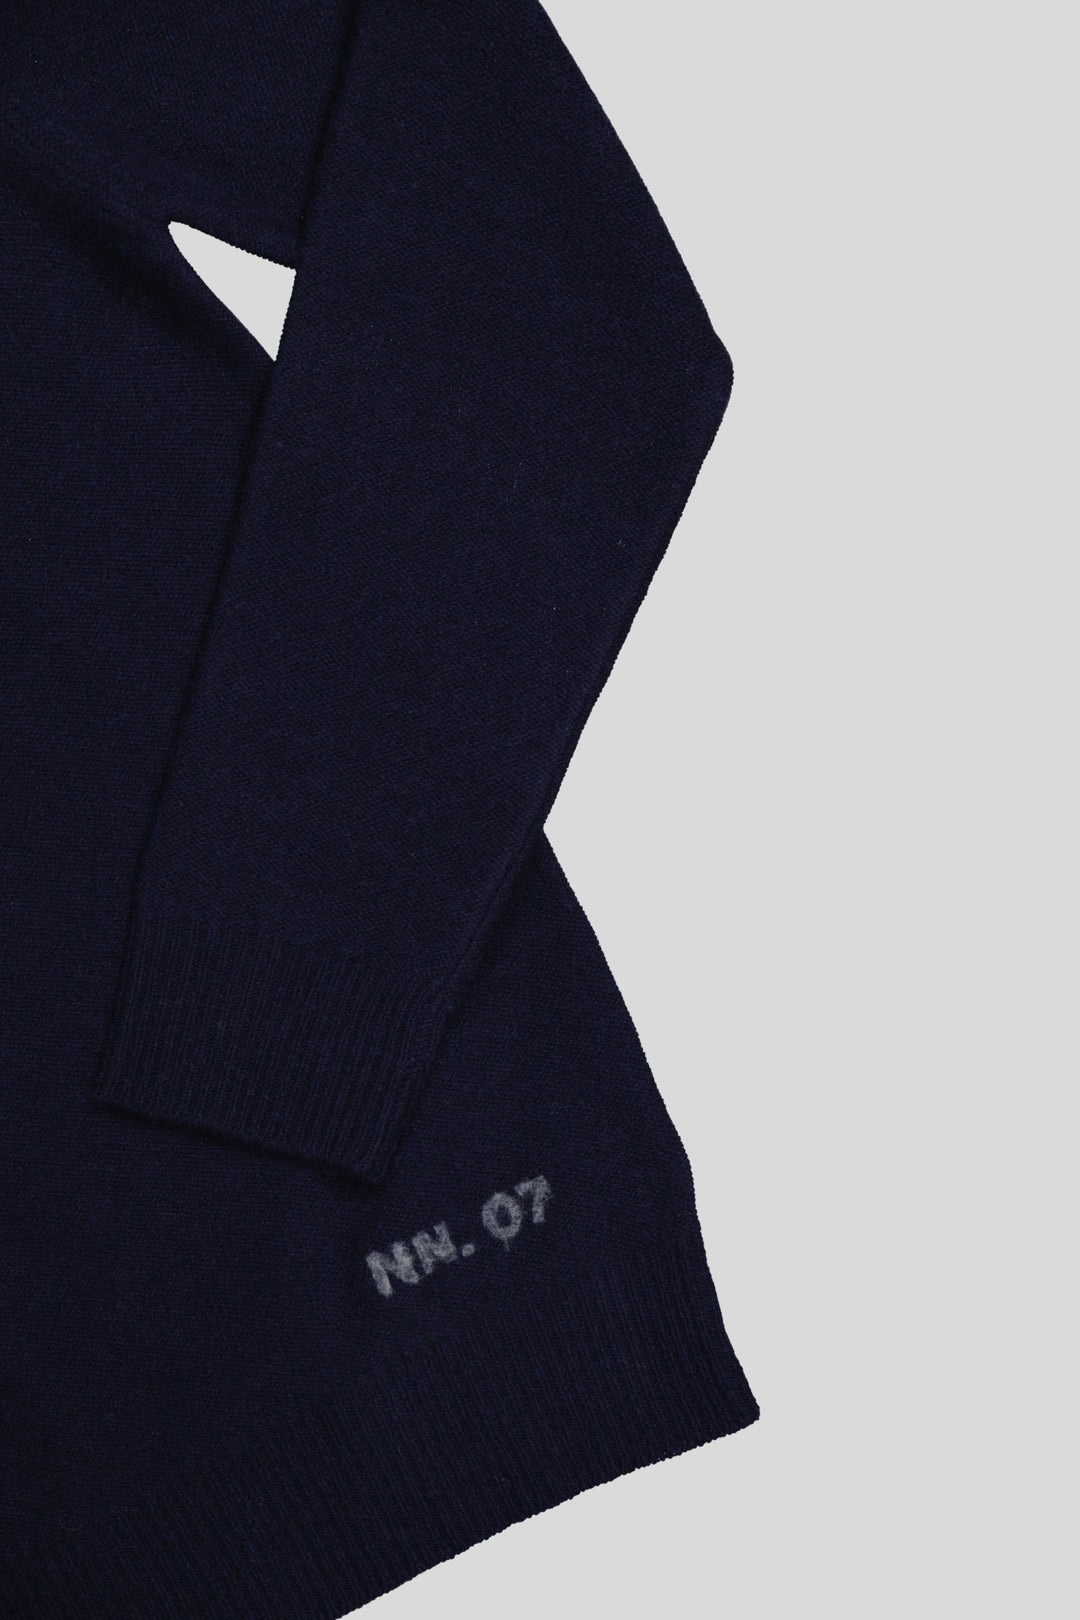 NN07 - Nigel 6585 Crewneck Pullover in Navy Blue | Buster McGee